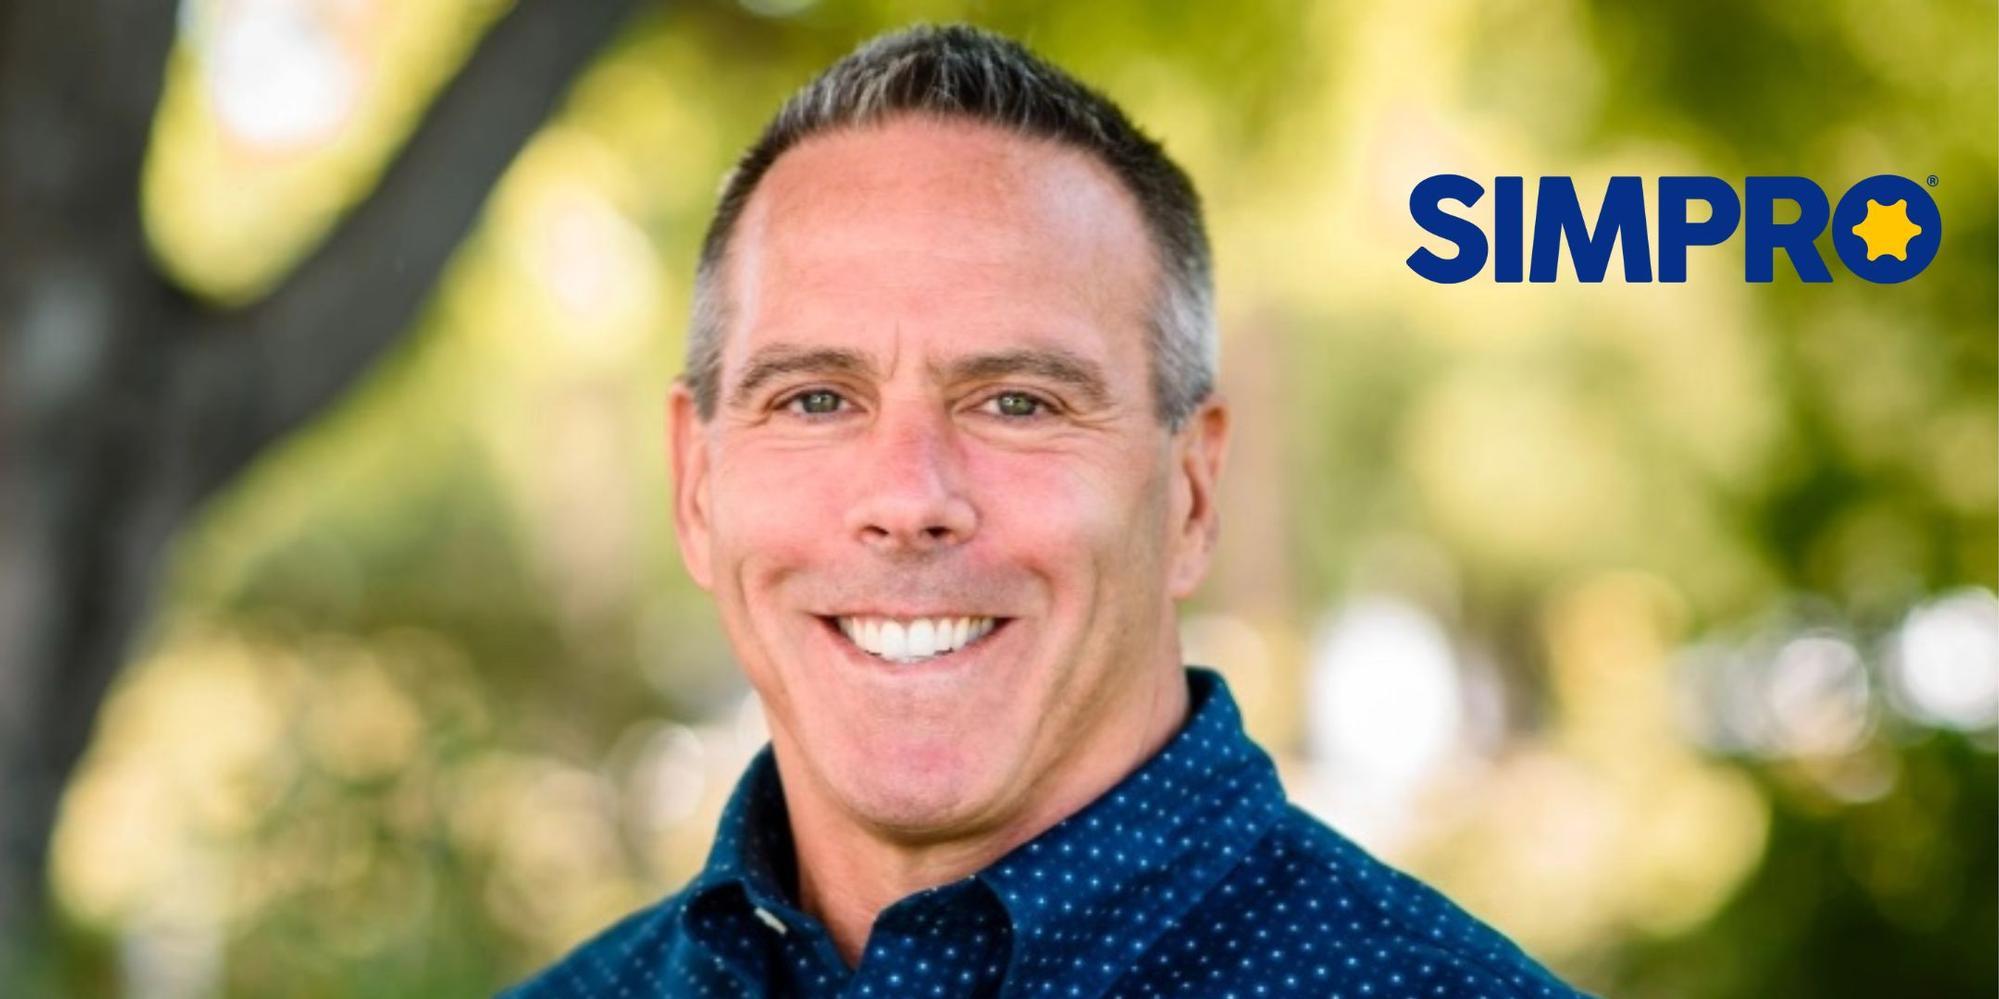 Simpro names Gary Specter as CEO to lead new era of growth